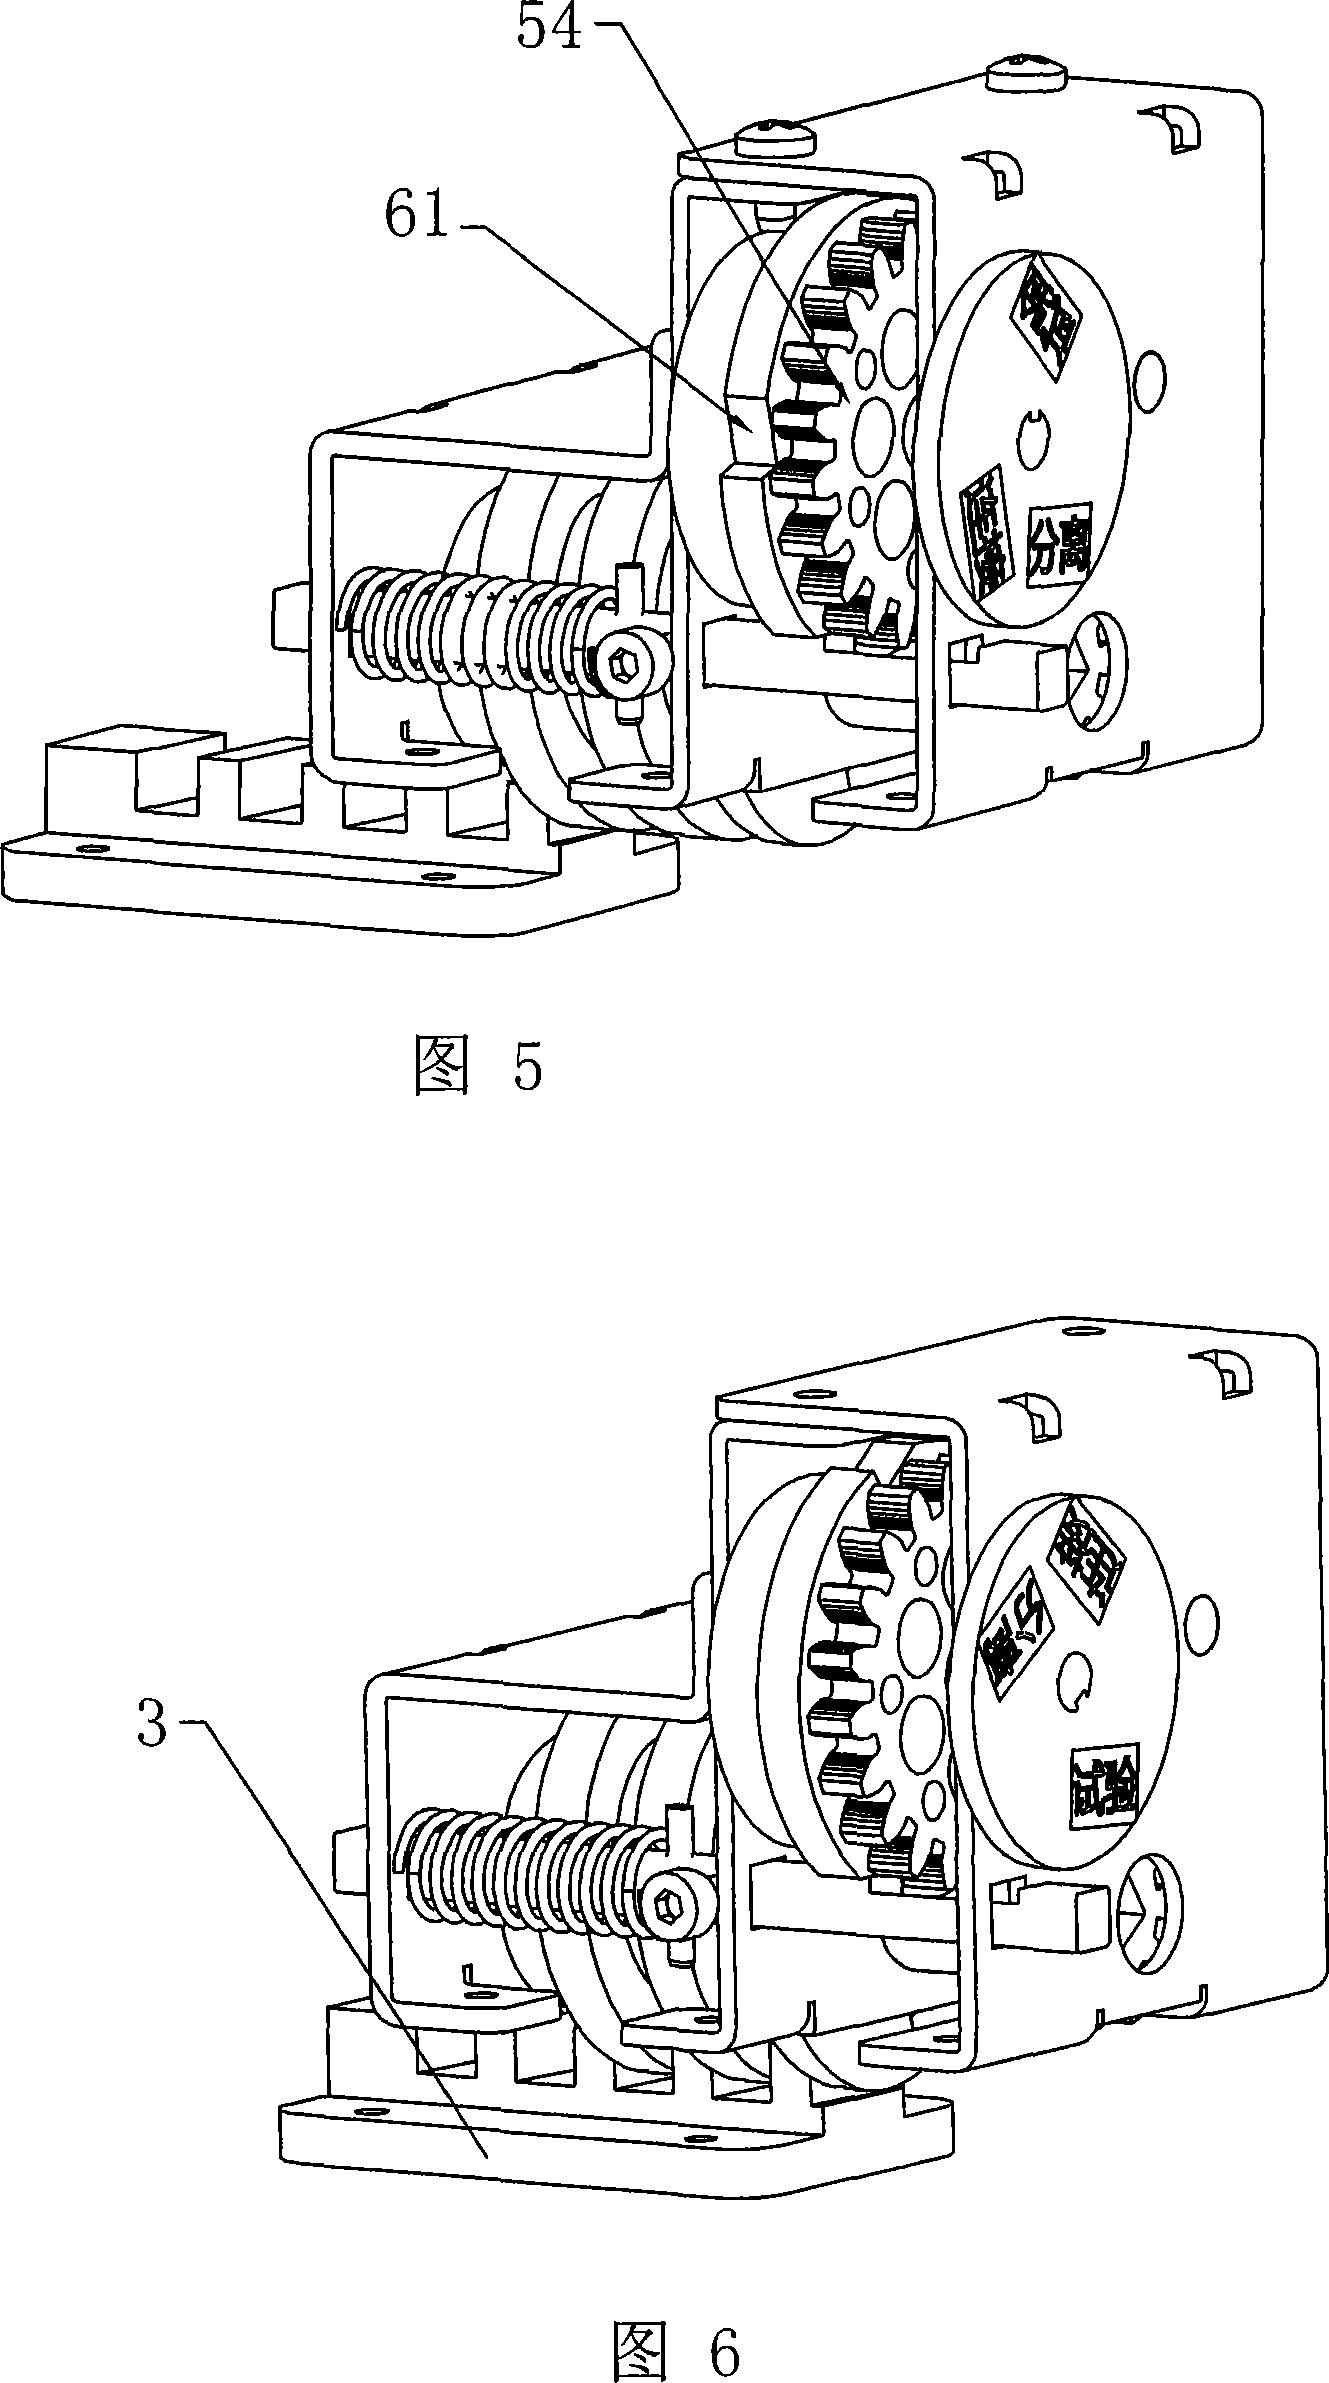 A low pressure drawer type driving mechanism applied for switchboard drawer